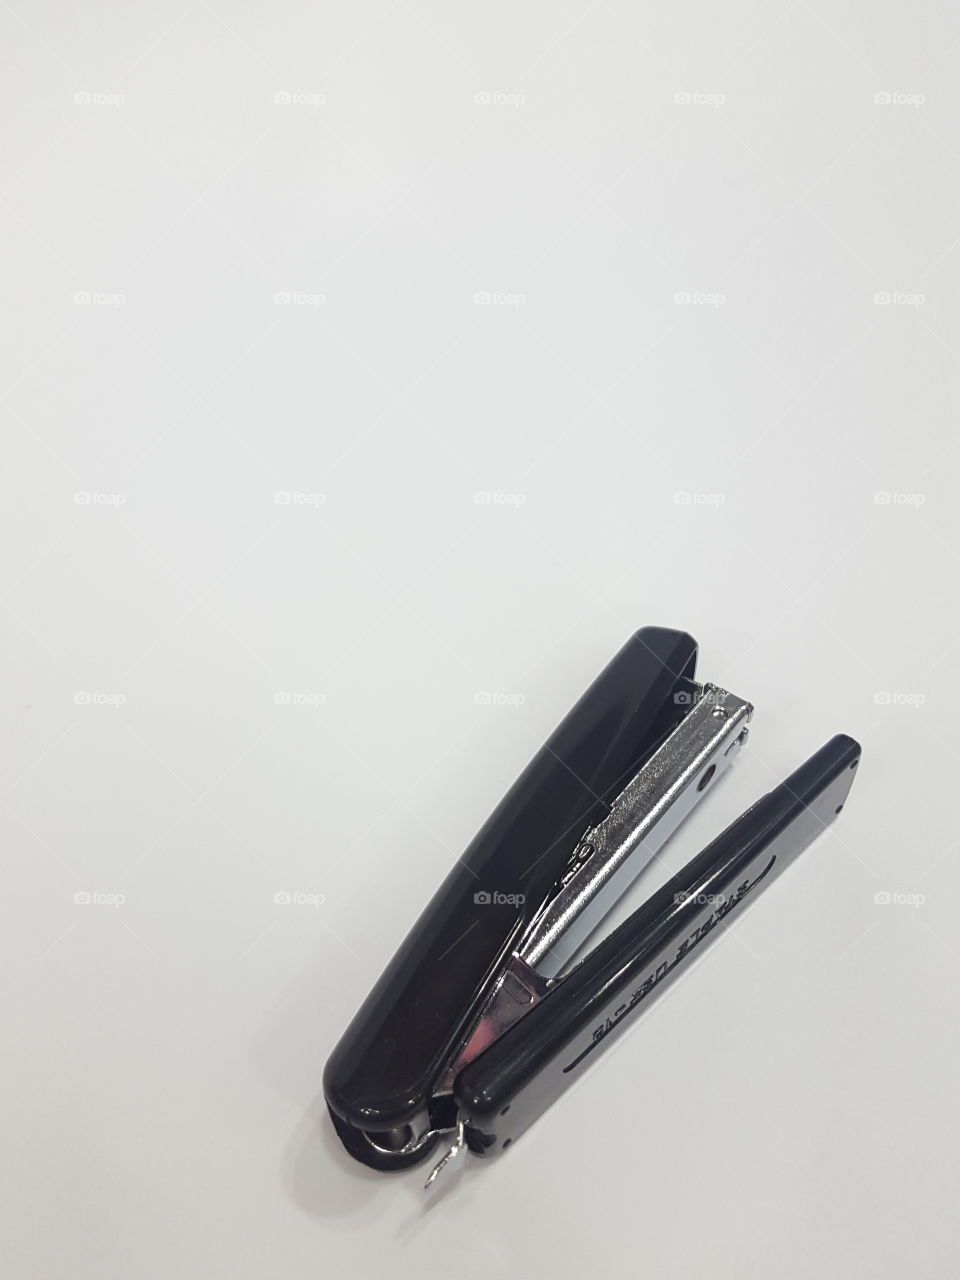 Black Plastic coated paper stapler for office stationery supplies